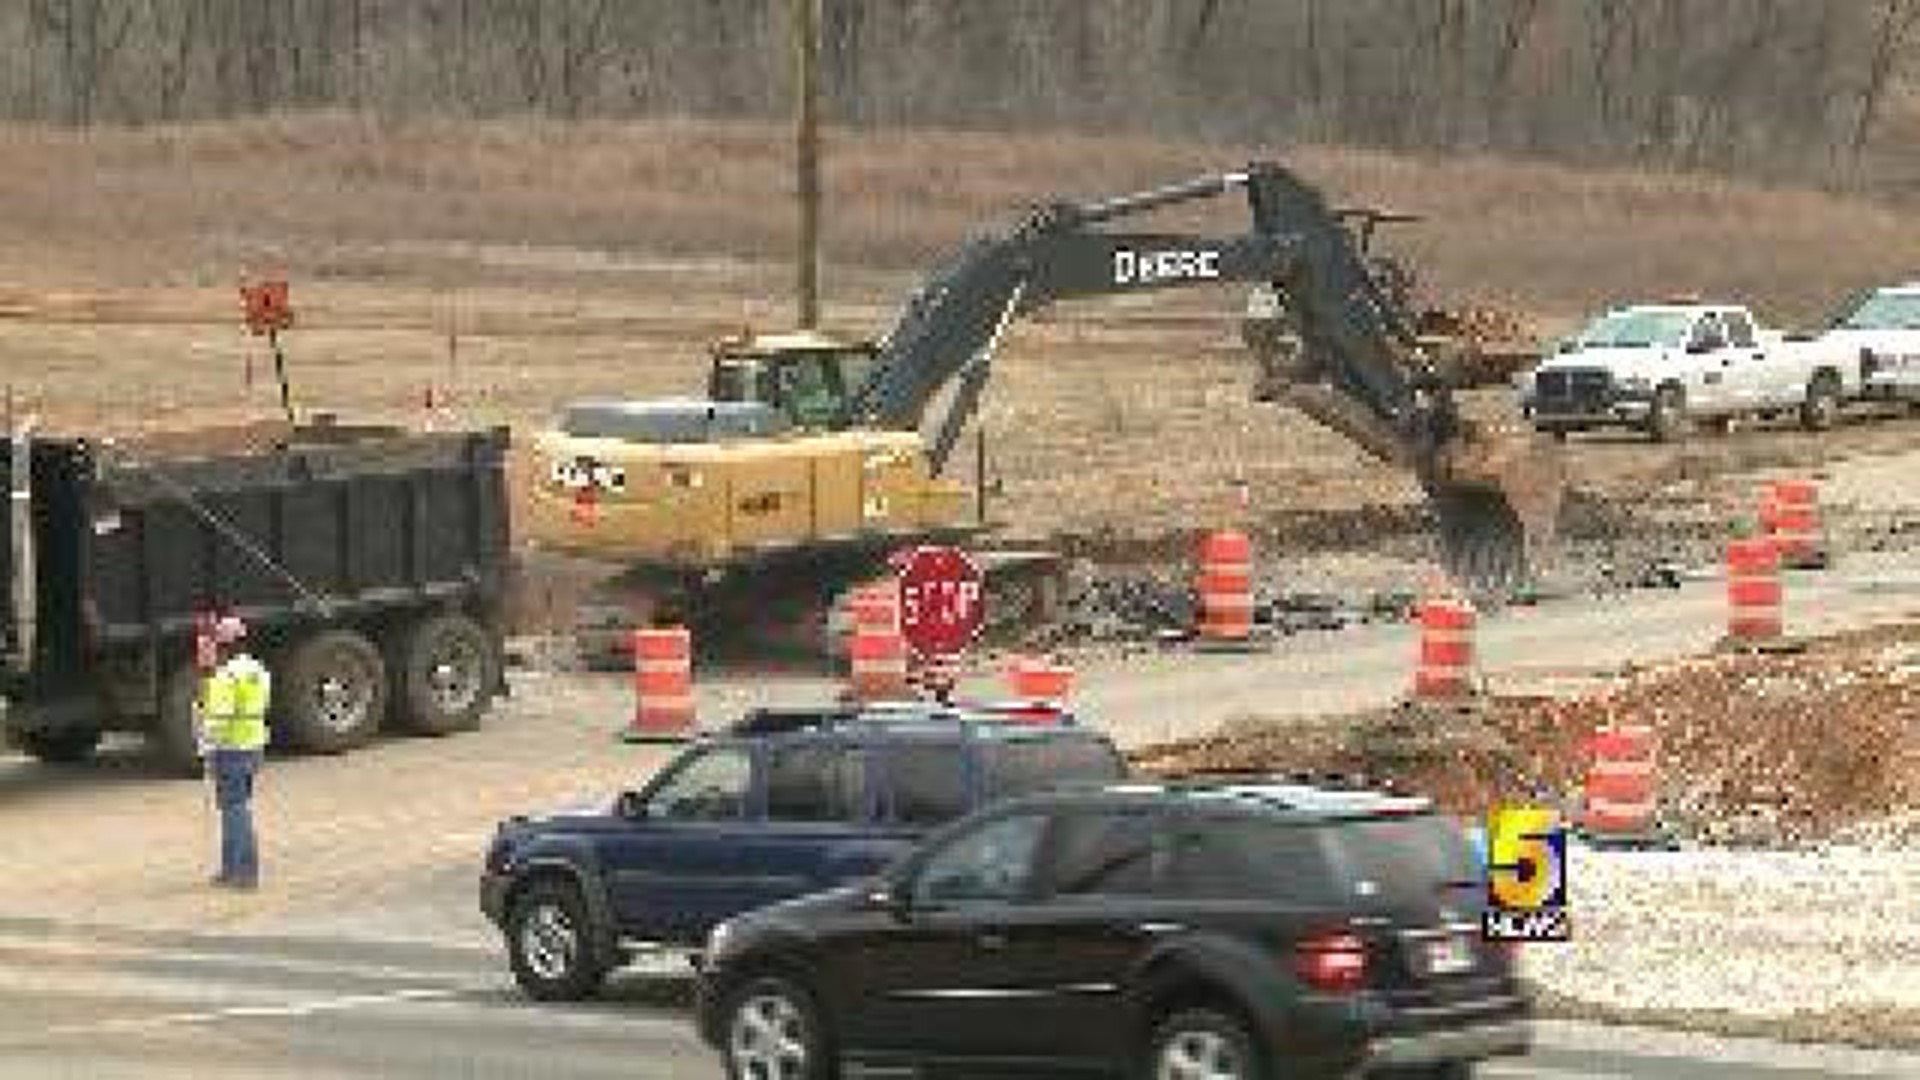 Johnson Road Project Expected to Boost Business